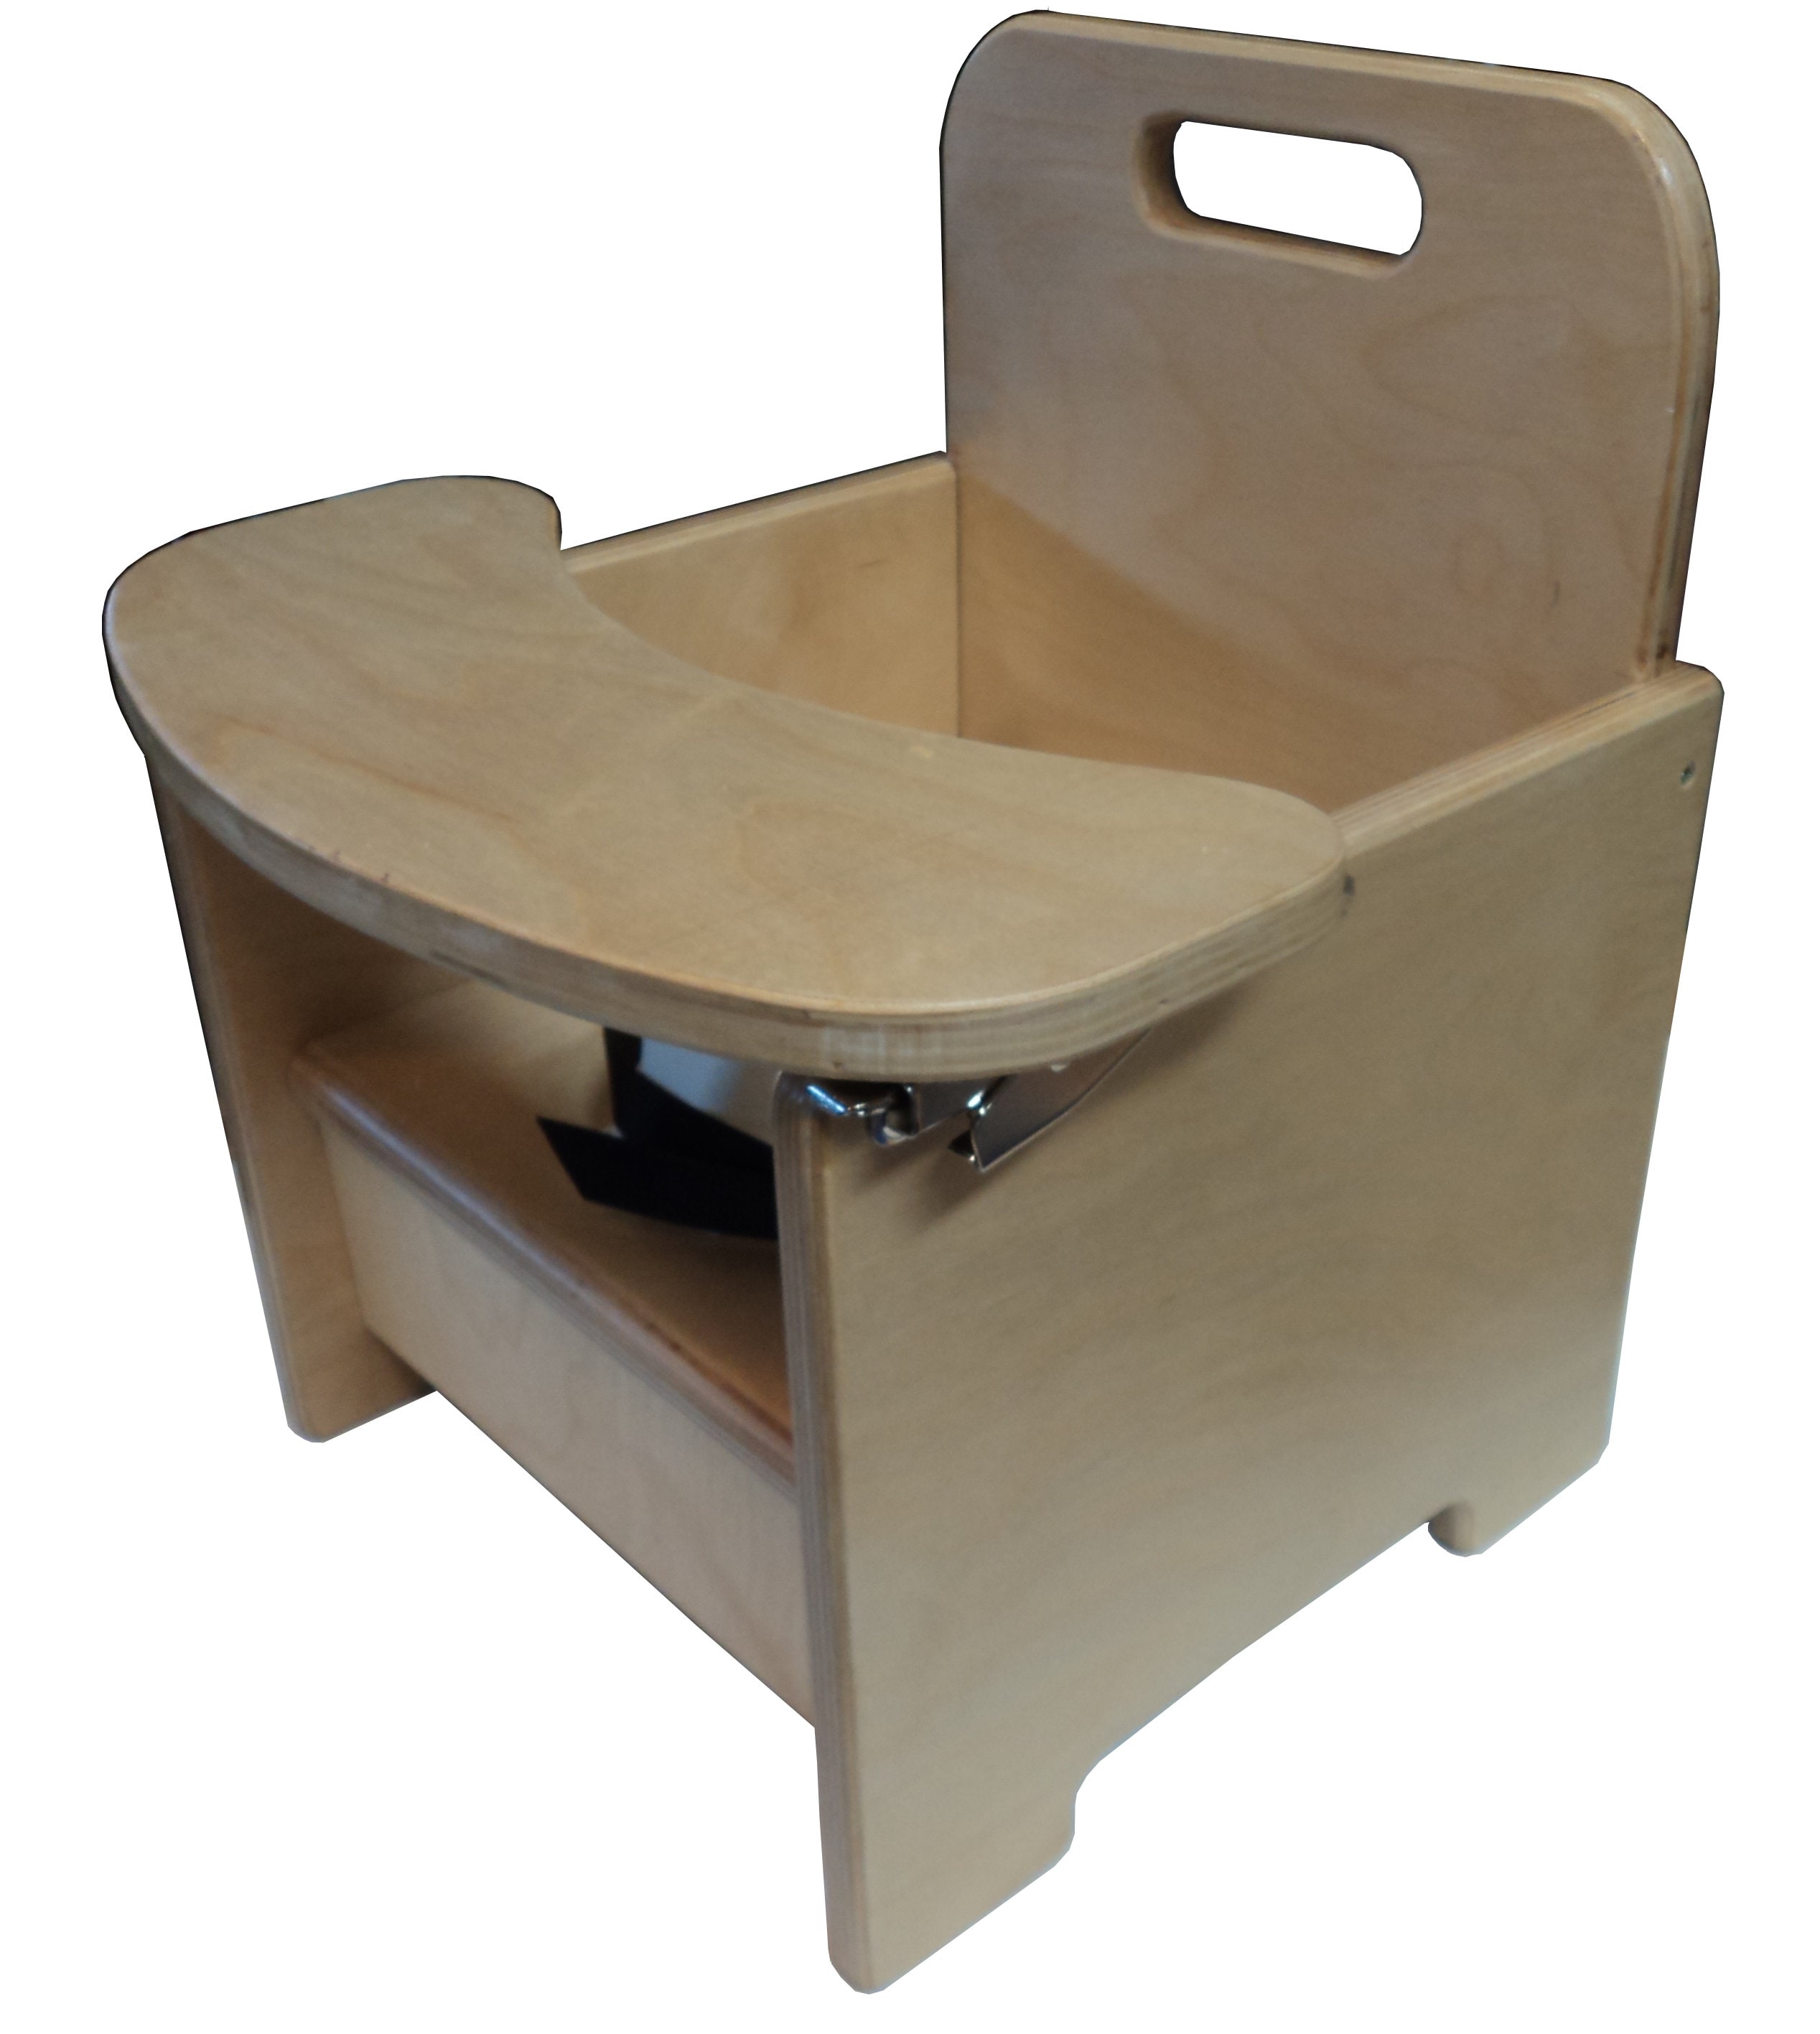 A New Wooden Potty Chair W Latching Tray Pot And Pee Etsy